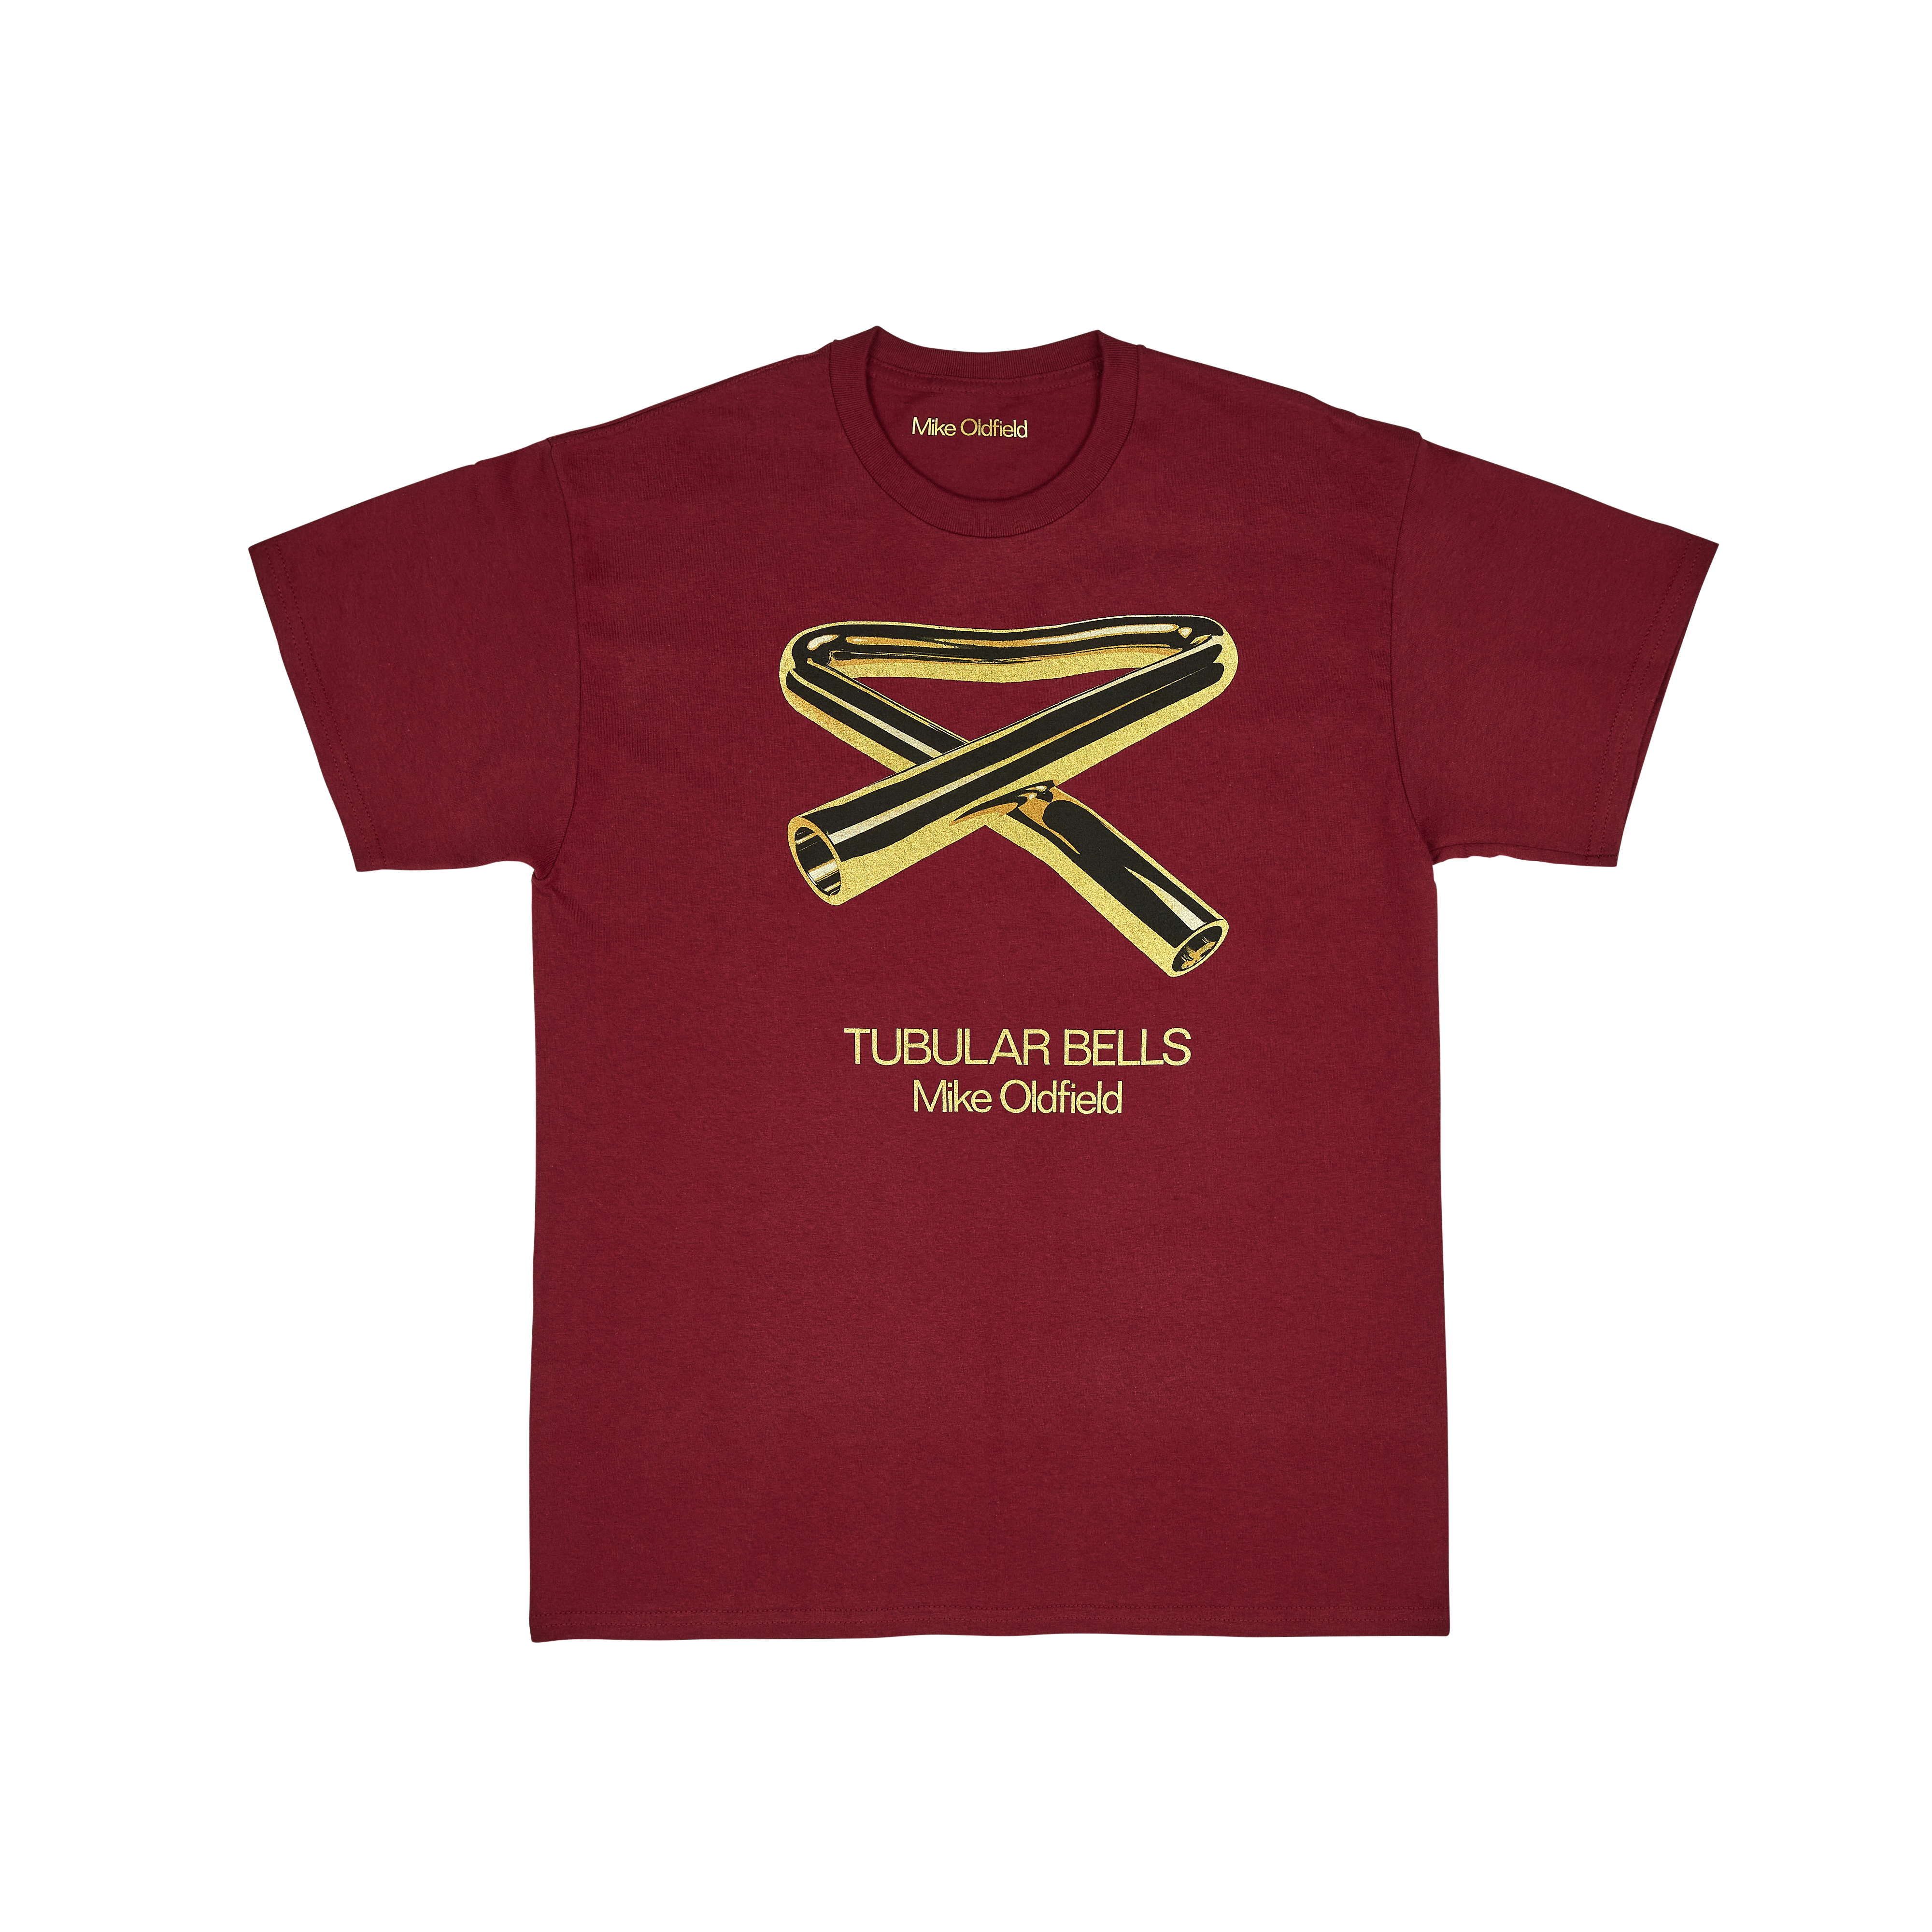 Official Hand Numbered Limited Edition A2 Print (1/2) + Official Tubular Bells Anniversary T-shirt (Maroon)